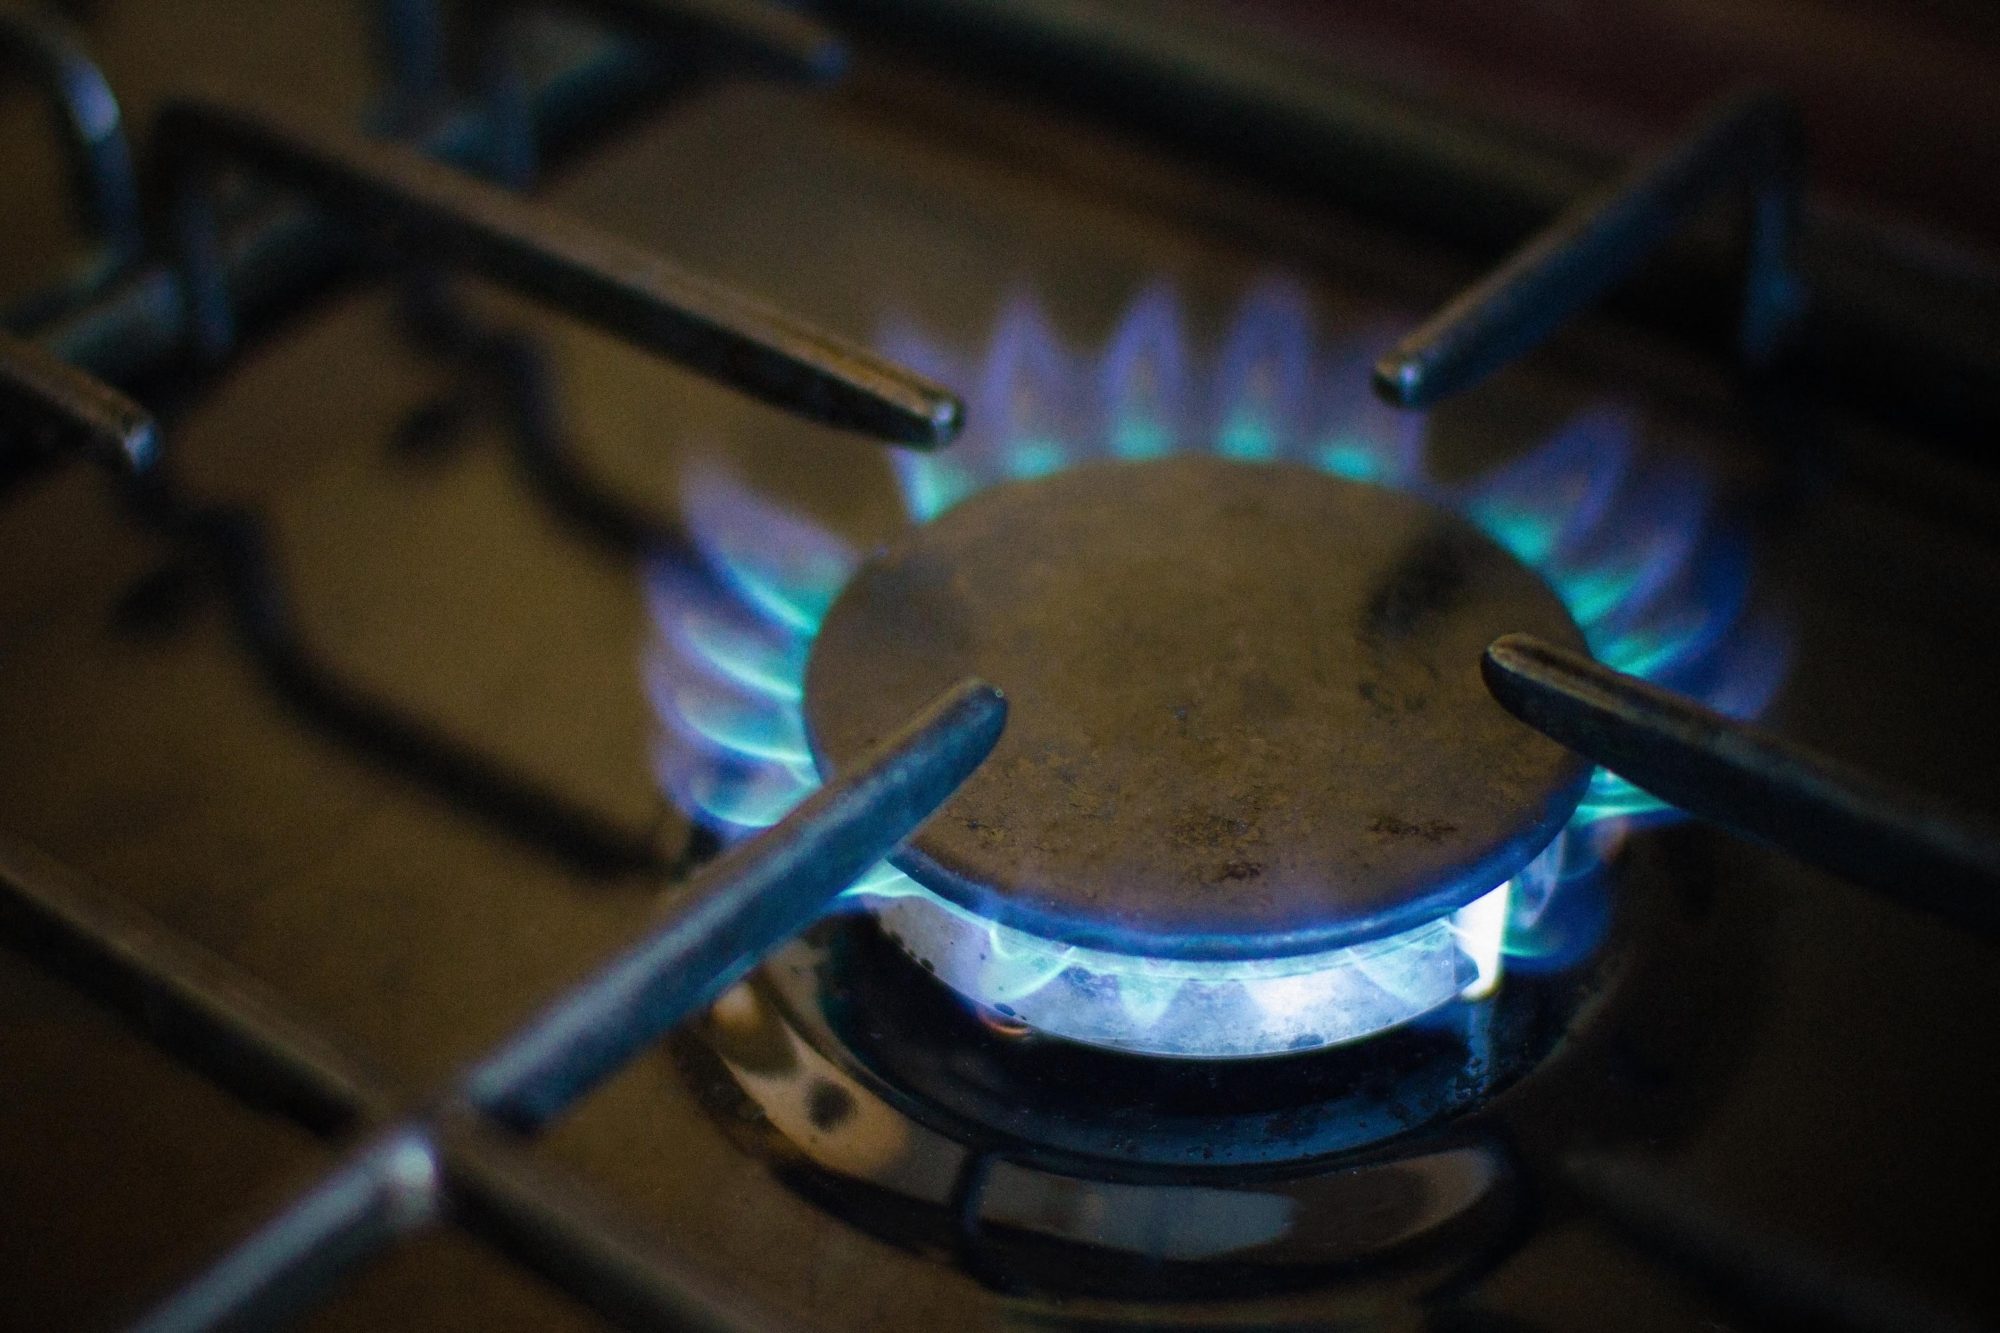 Black gas stove with blue flame